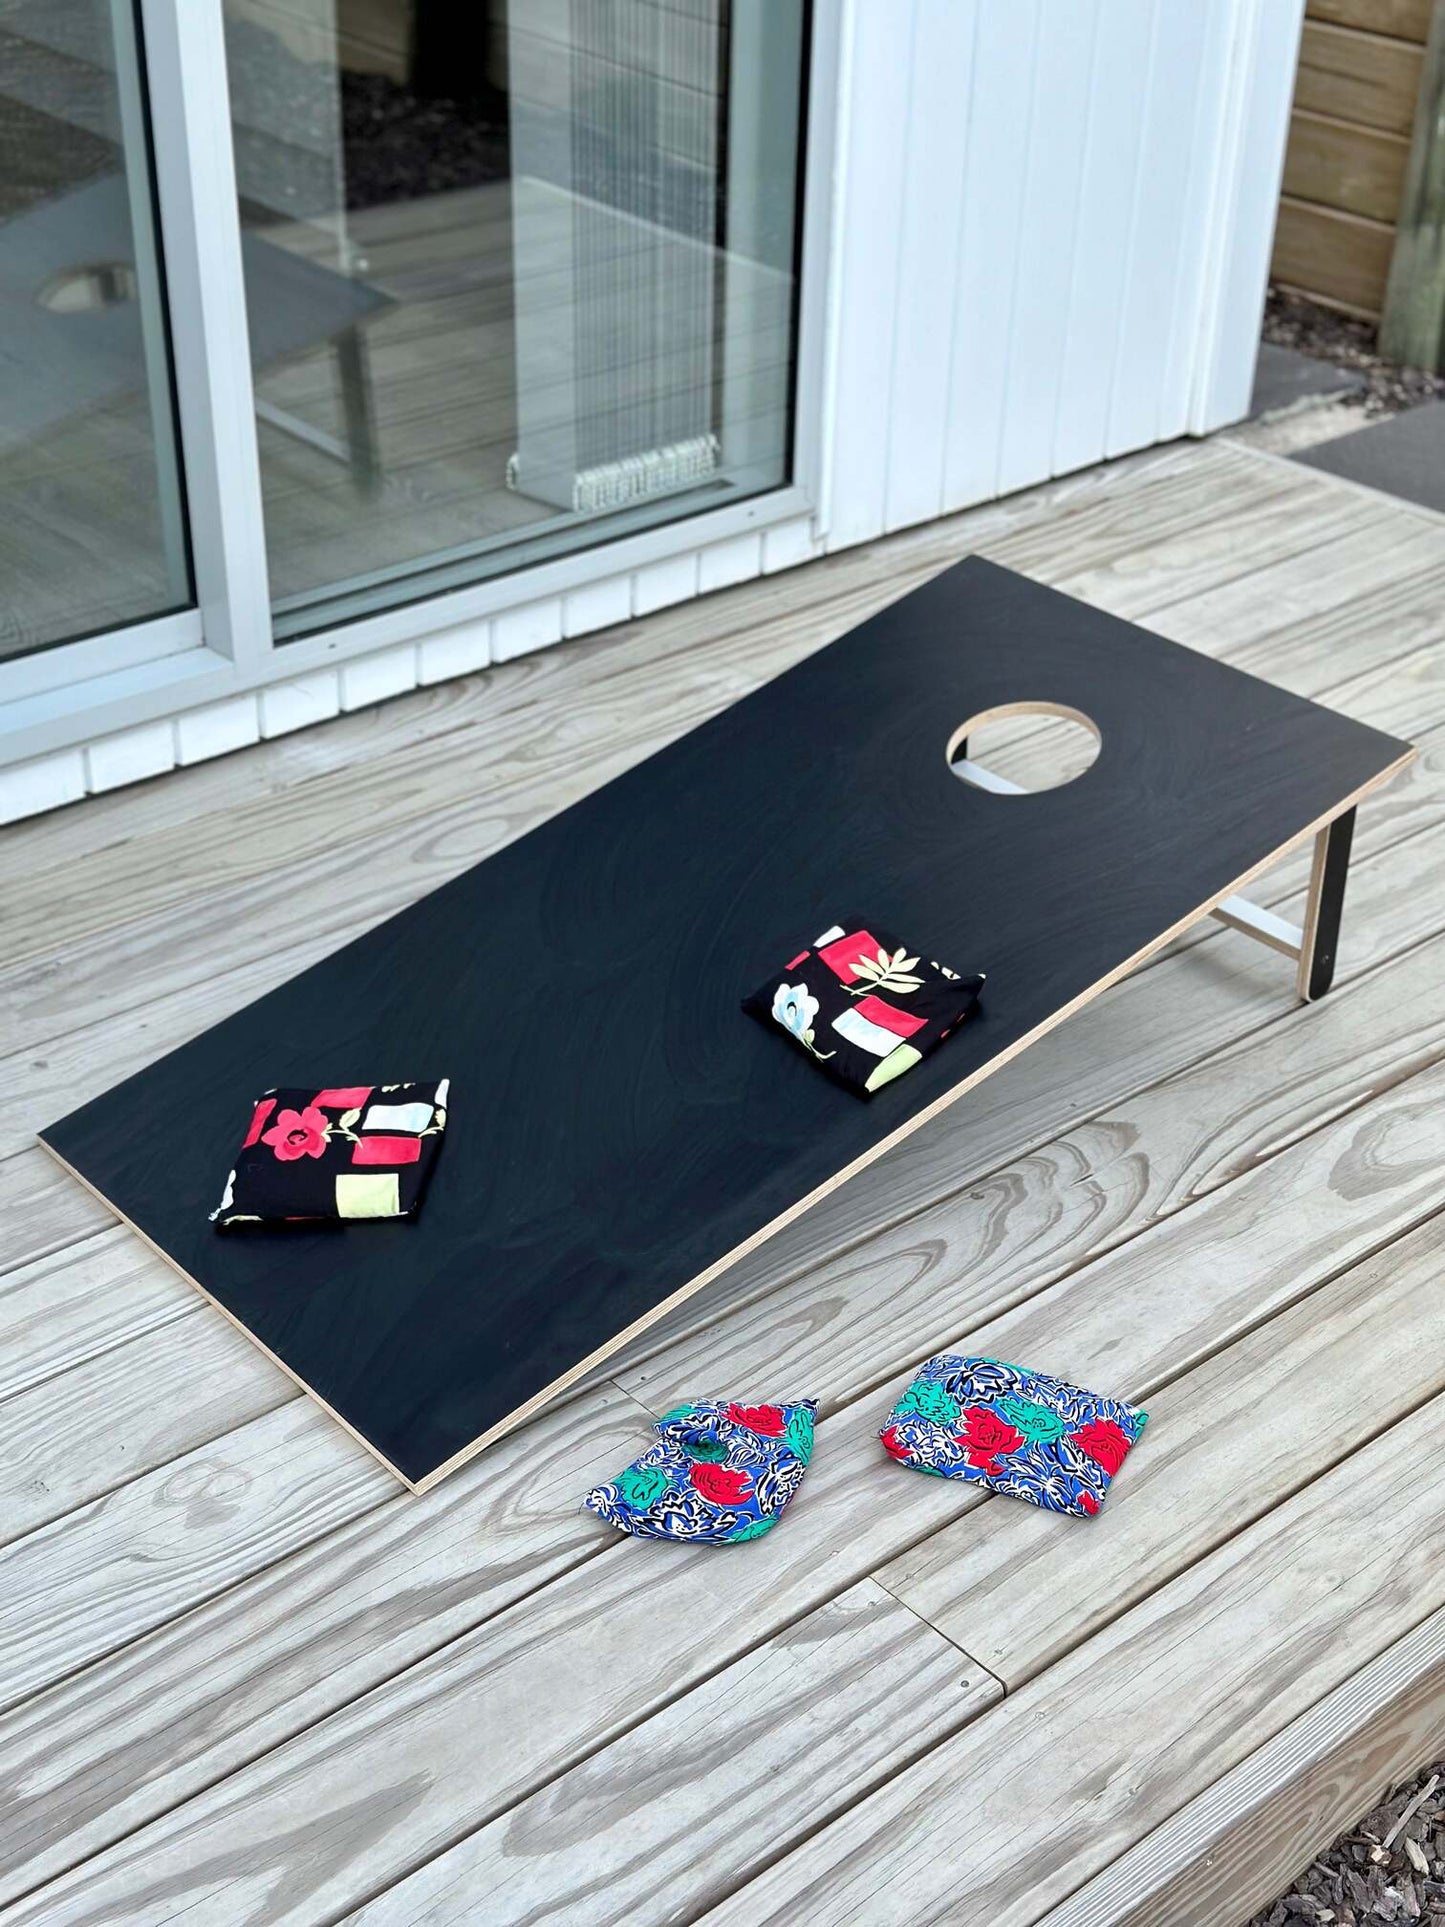 Get ready for outdoor fun with our Cornhole game board. A crowd-pleaser at any backyard gathering.